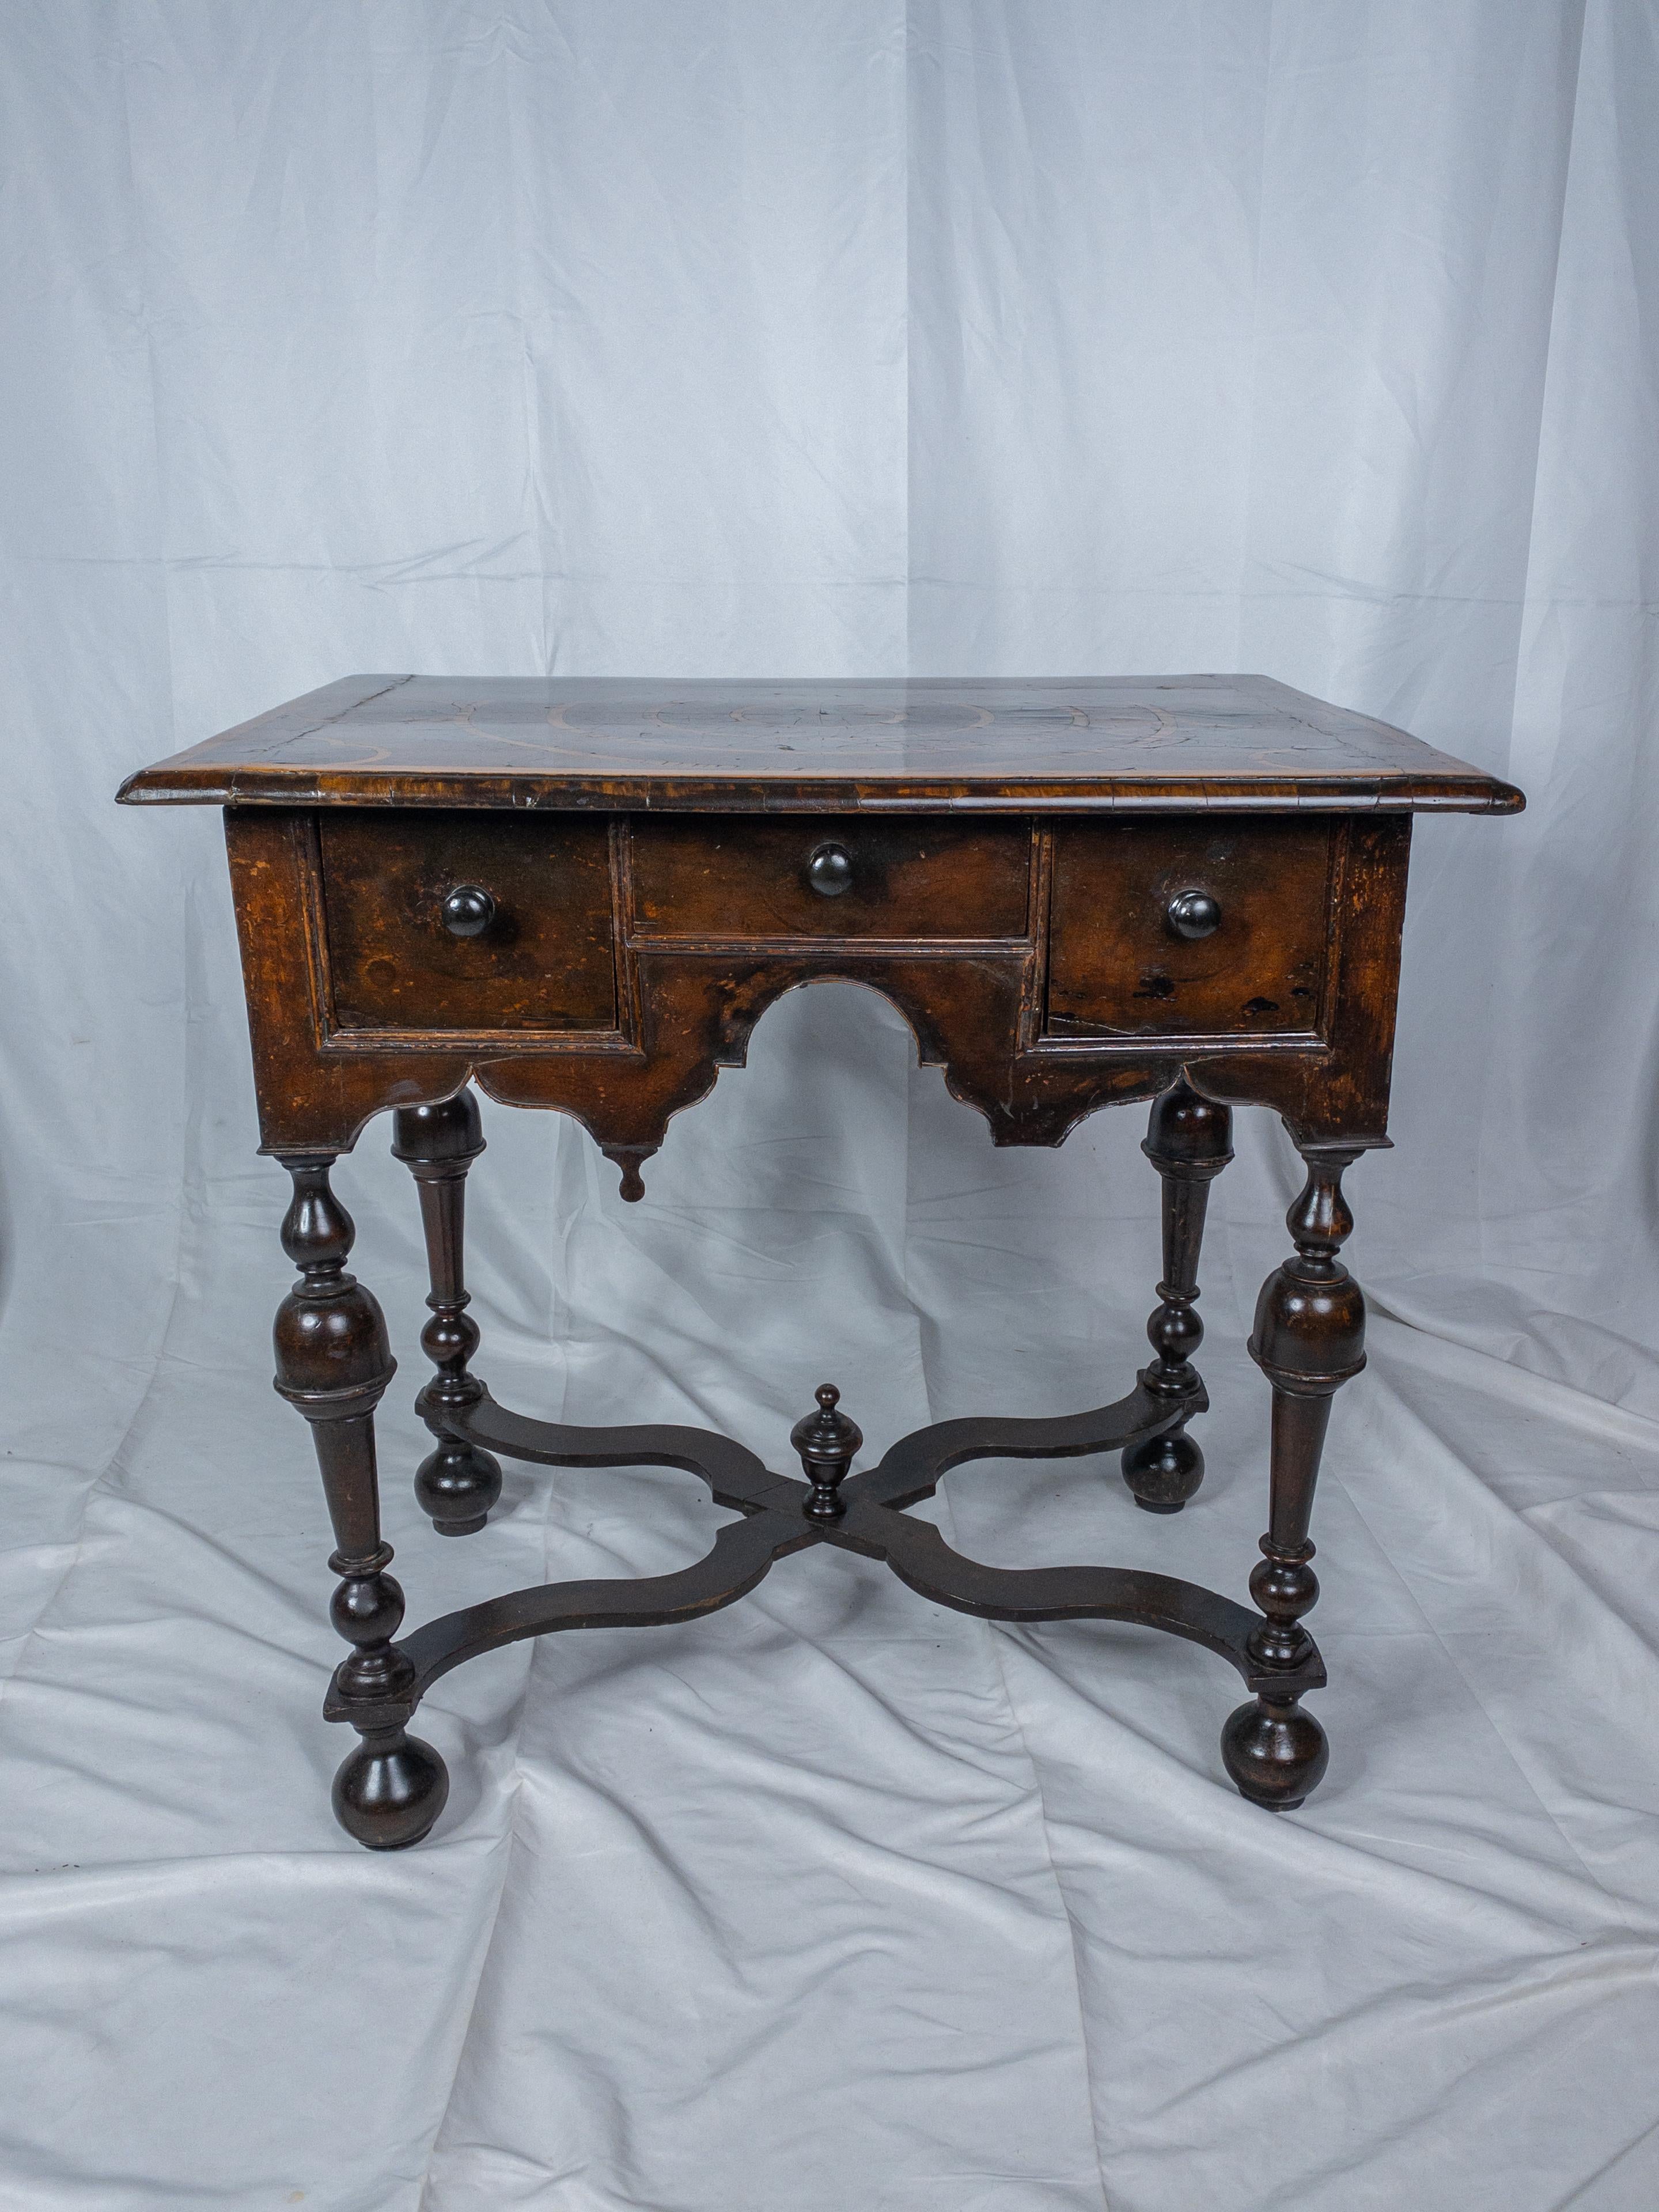 The 17th Century William and Mary Oyster Veneered Walnut Dressing Table stands as a testament to the exquisite craftsmanship and design sensibilities of the period. Its tabletop is adorned with oyster veneer, a luxurious touch that adds depth and